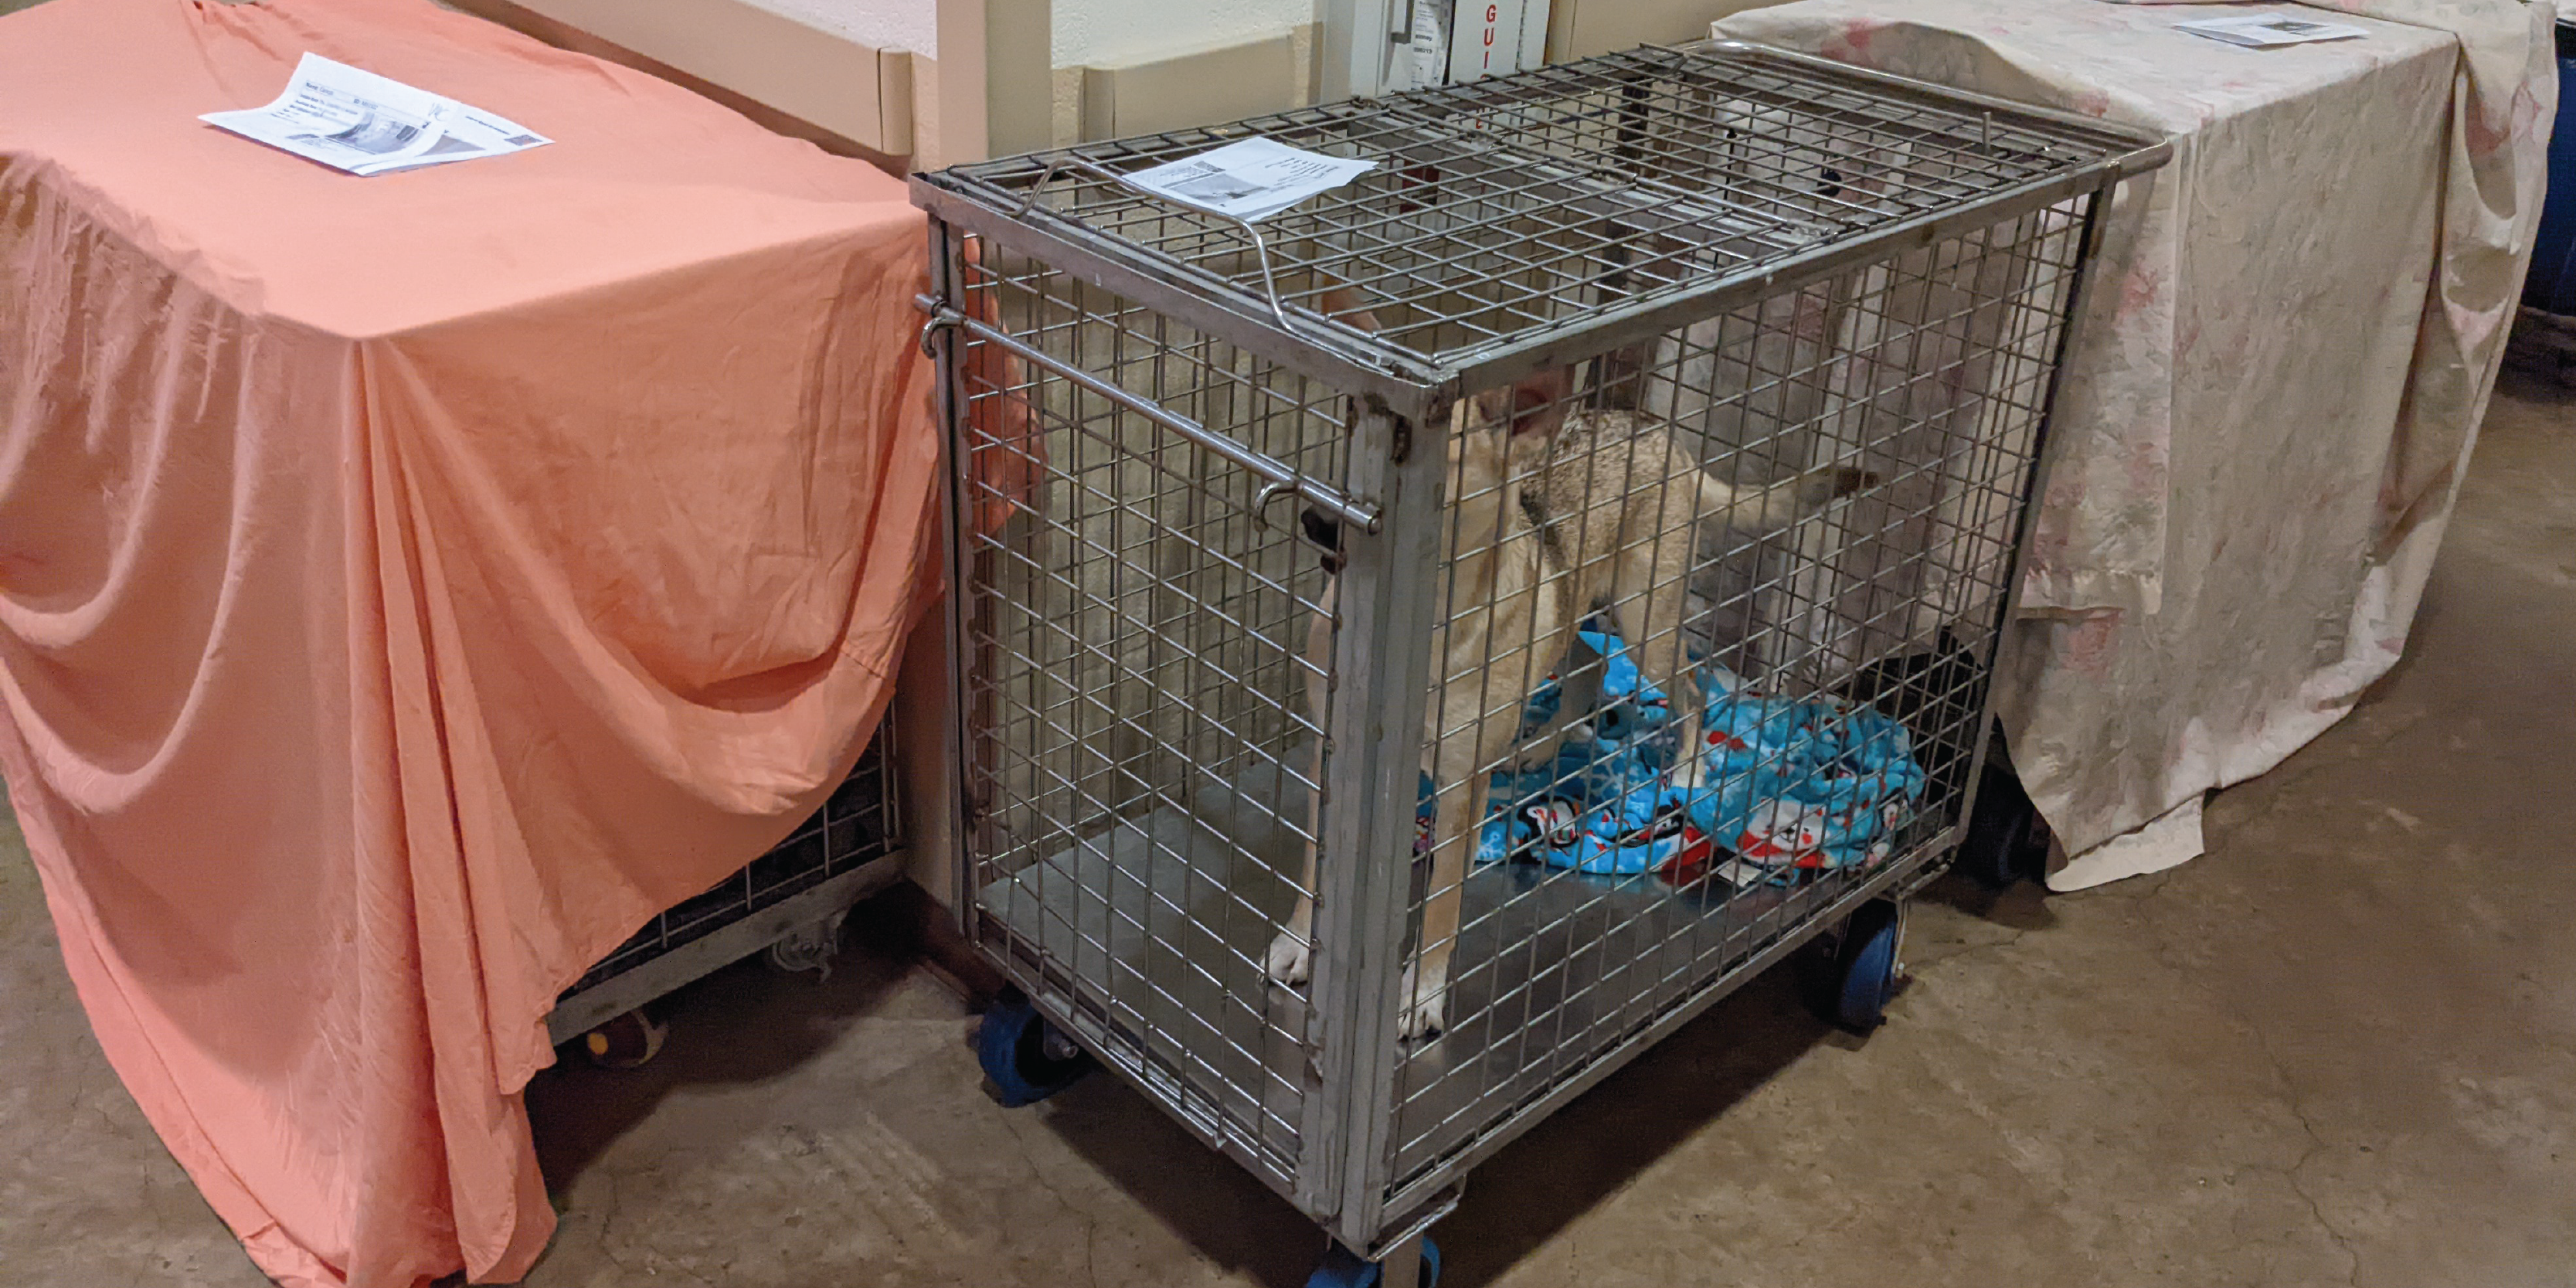 Dogs in temporary cages in hallway